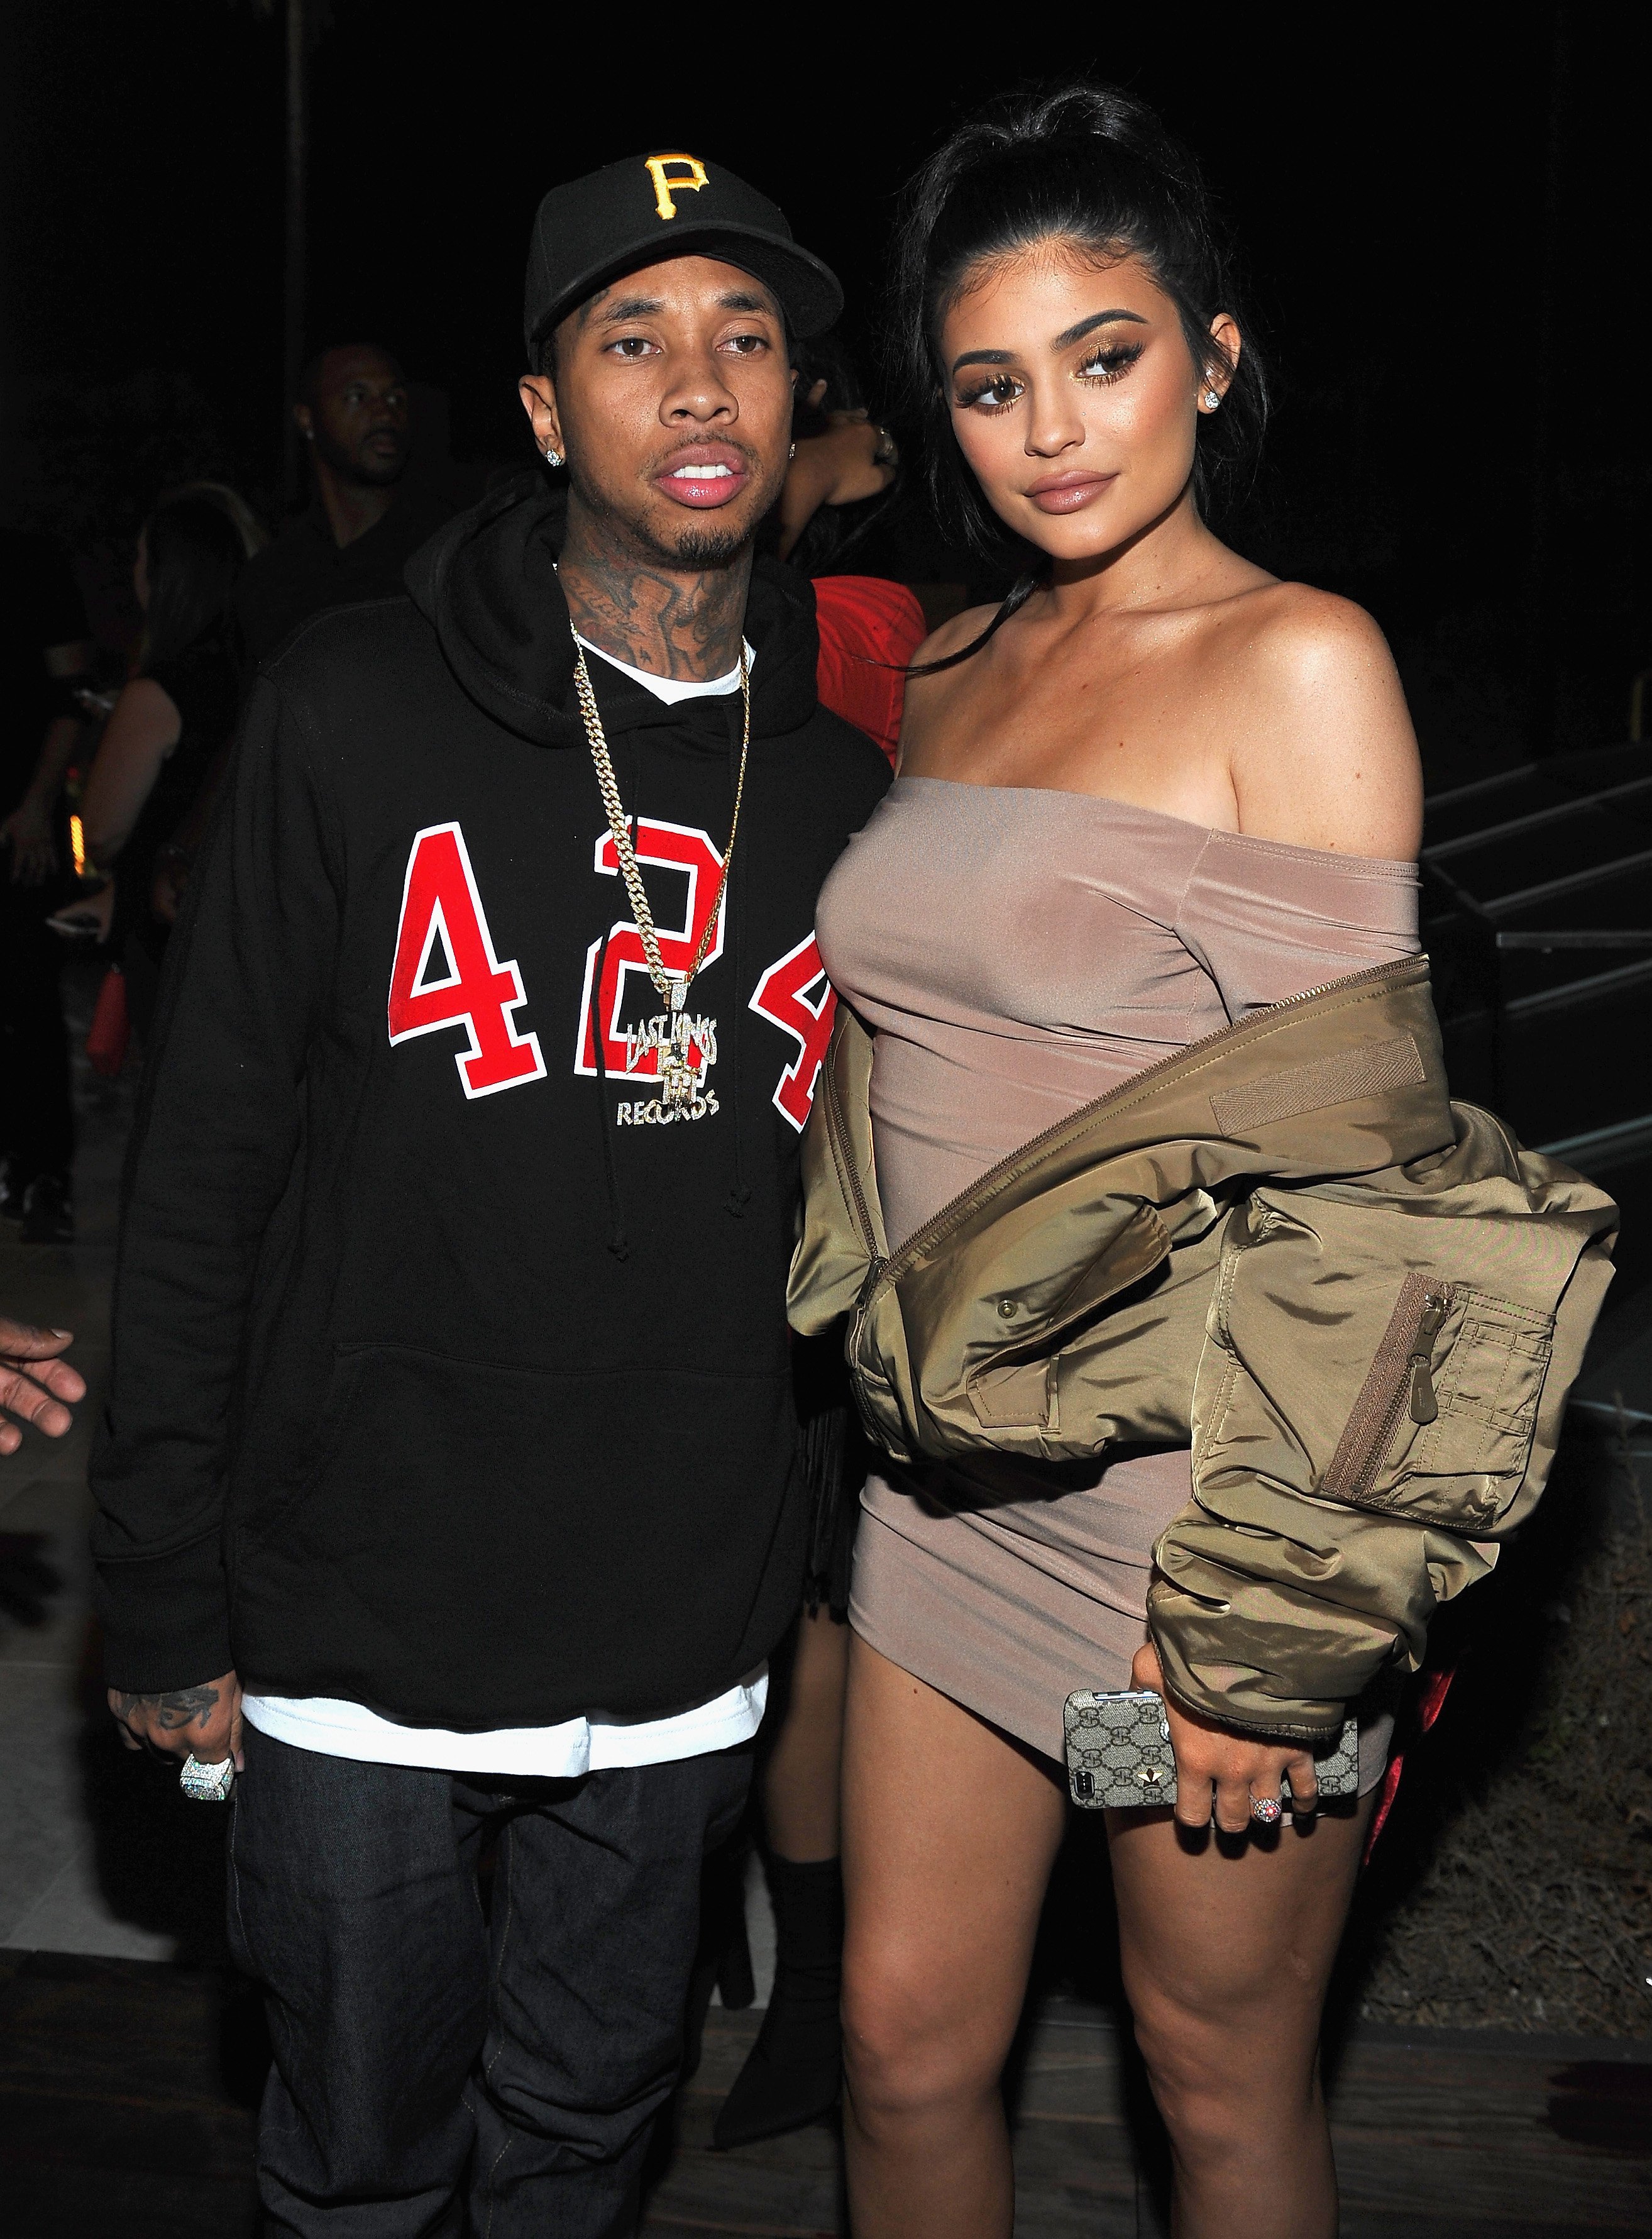 Tyga & Kylie Jenner at Boohoo X Jordyn Woods Launch Event in California on Aug. 31, 2016 | Photo: Getty Images